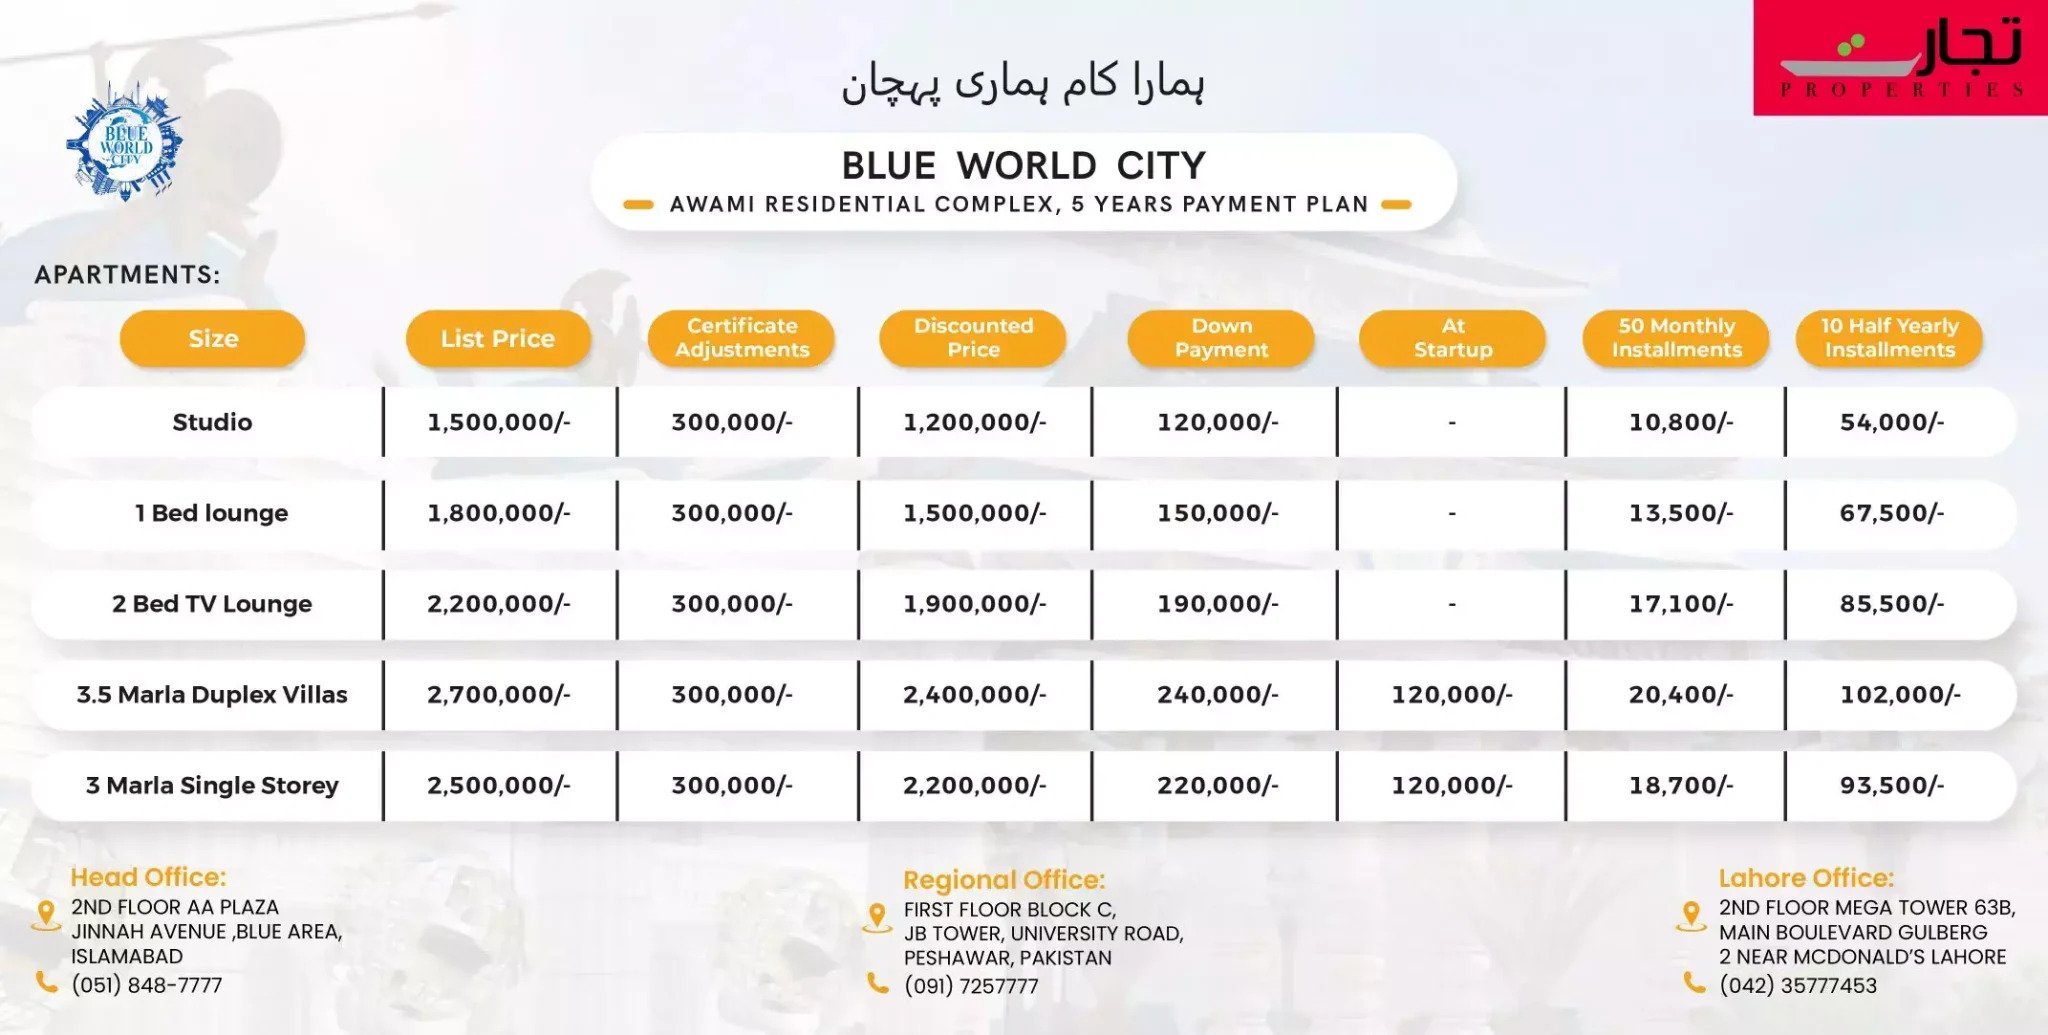 Buy Plots at Low Prices in Blue World City – Easy Payment Plan